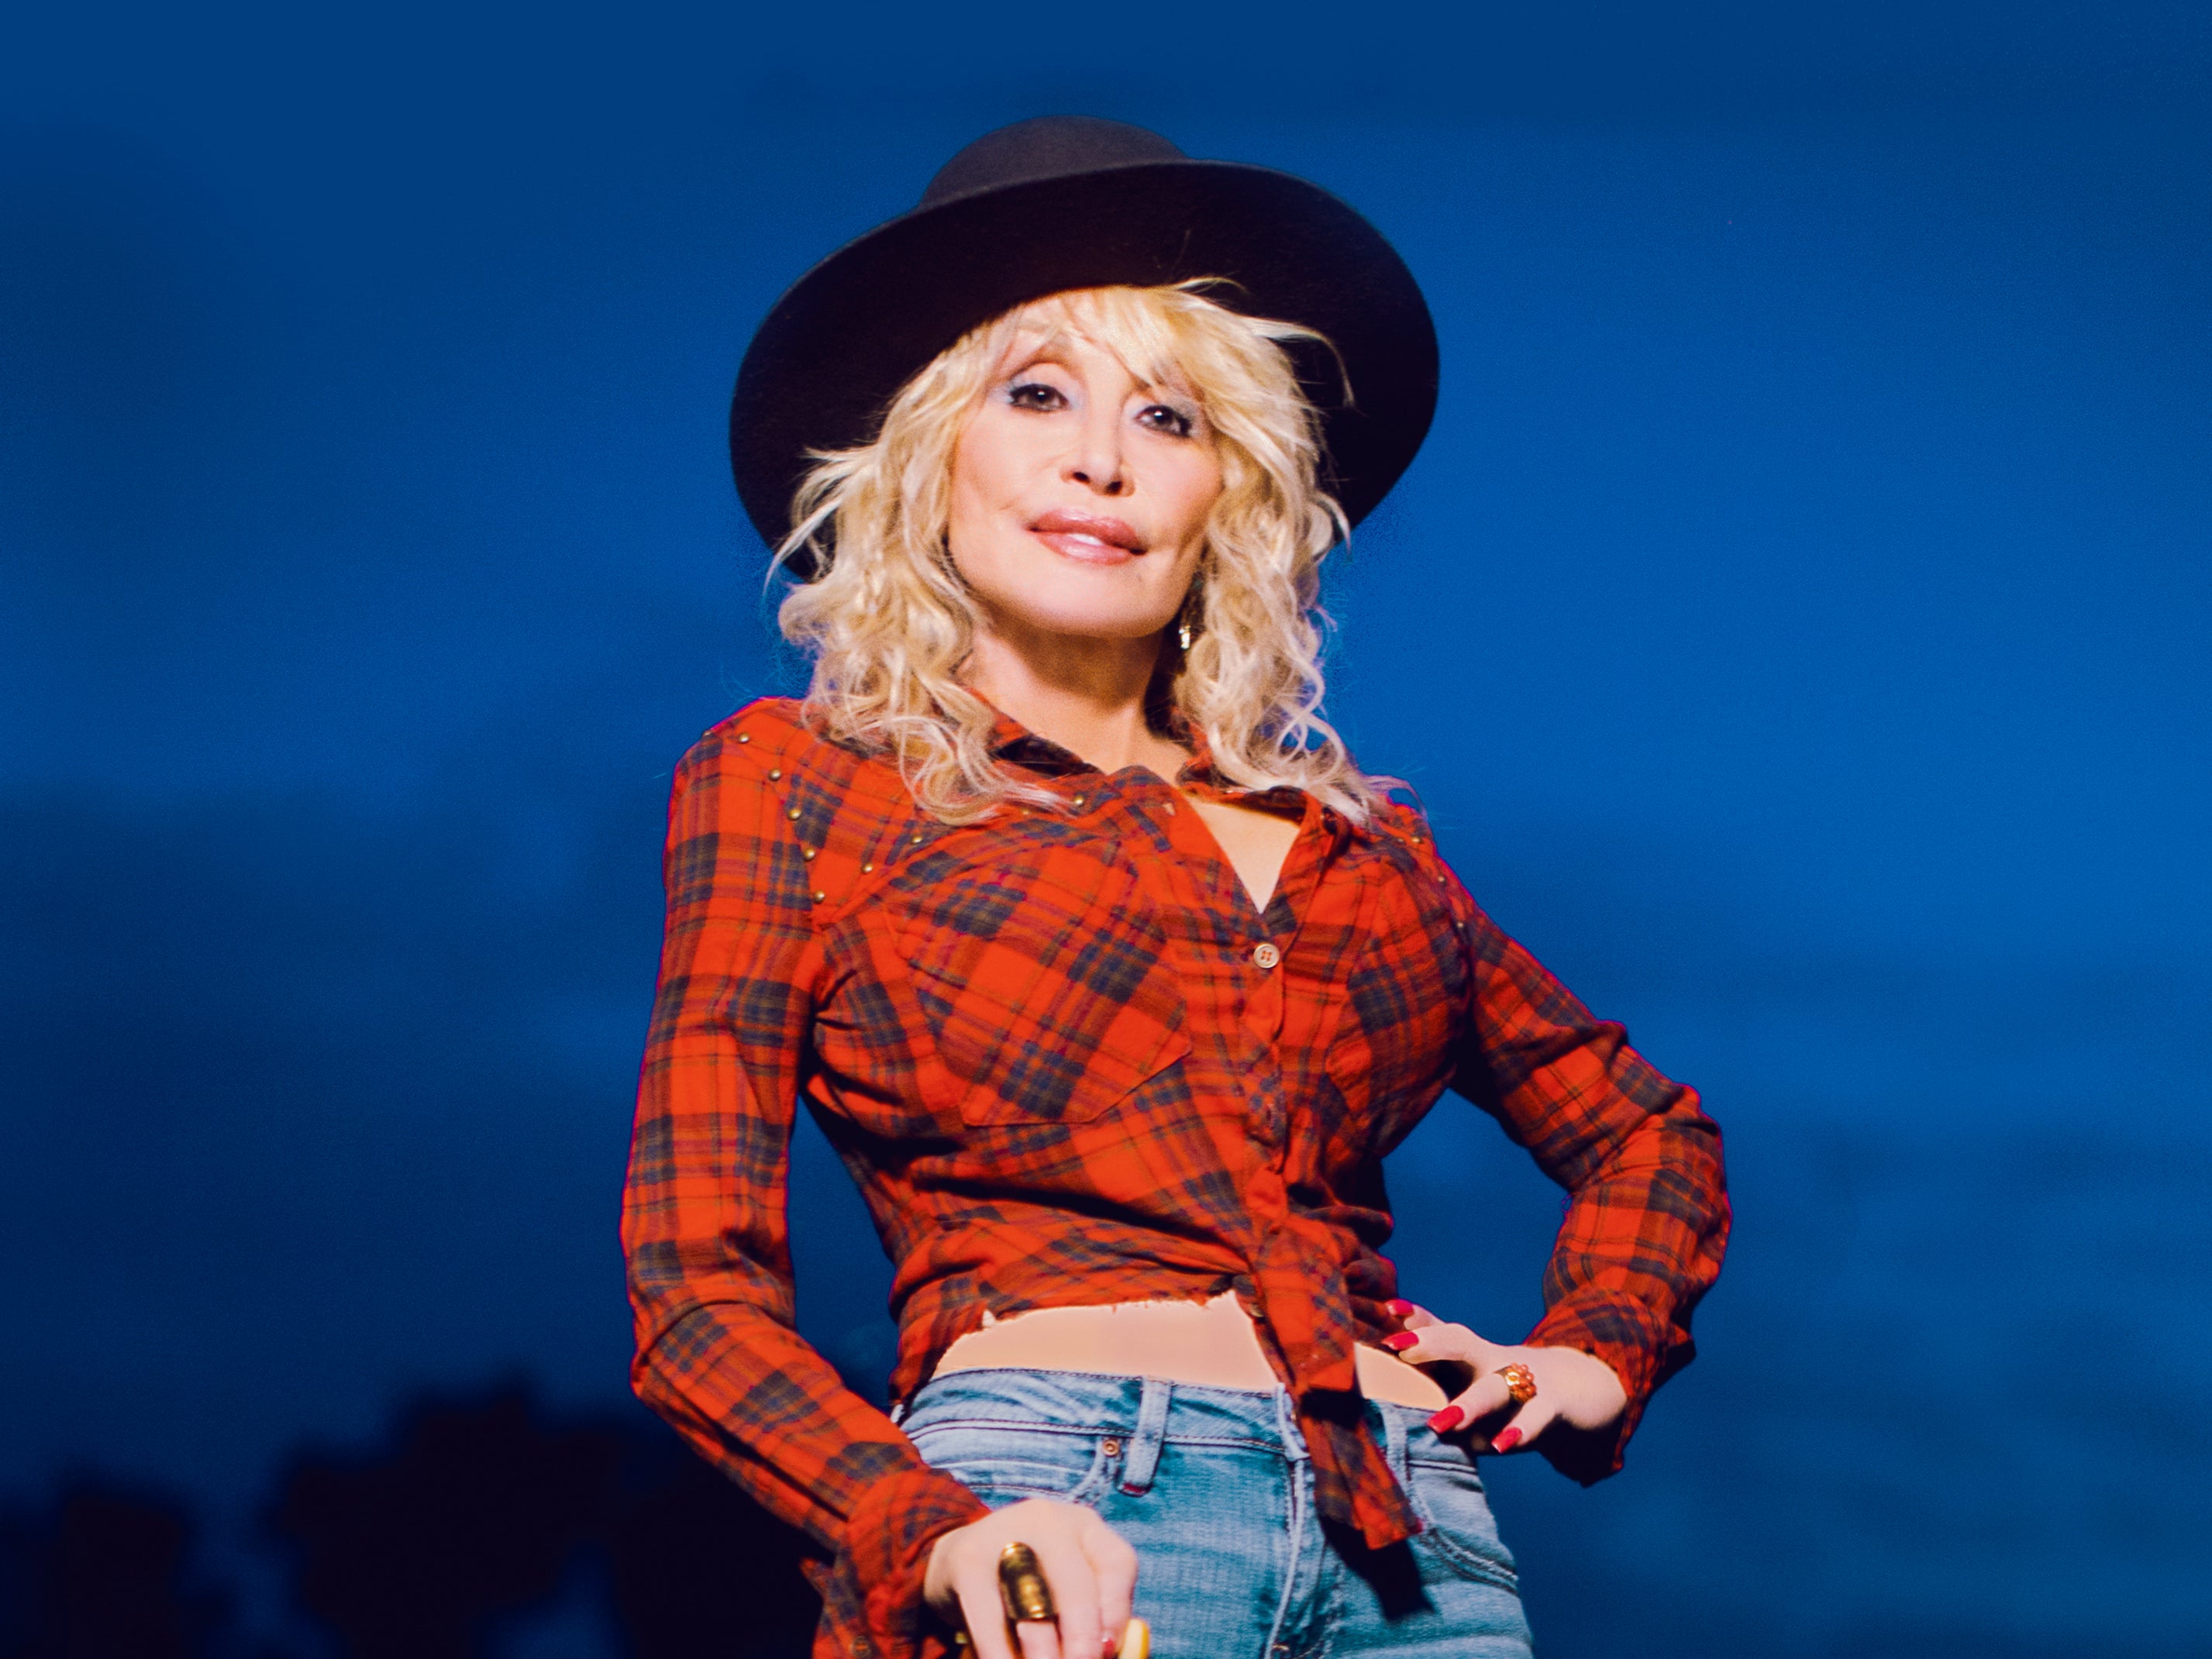 Dolli Petrn Full Hd Sex Videos - Dolly Parton review, Run Rose Run: Country music queen has a blast  narrating this deliciously hokey yarn | The Independent